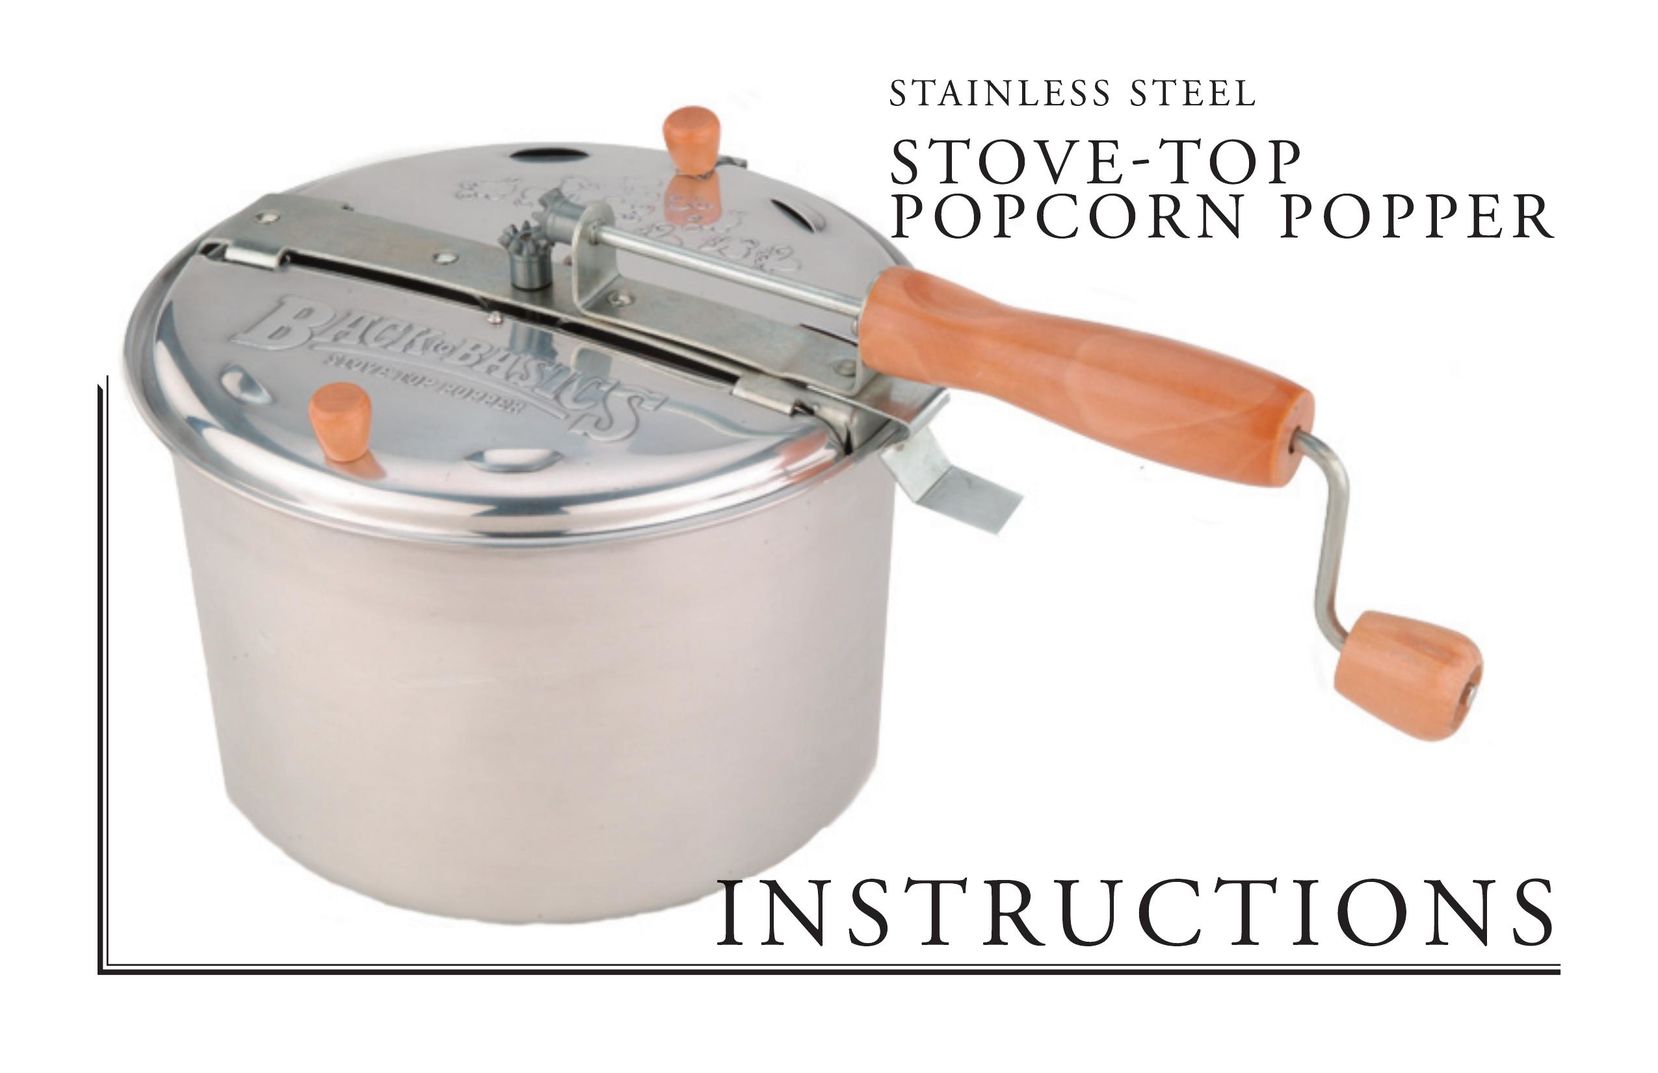 West Bend Back to Basics PC17553 Popcorn Poppers User Manual